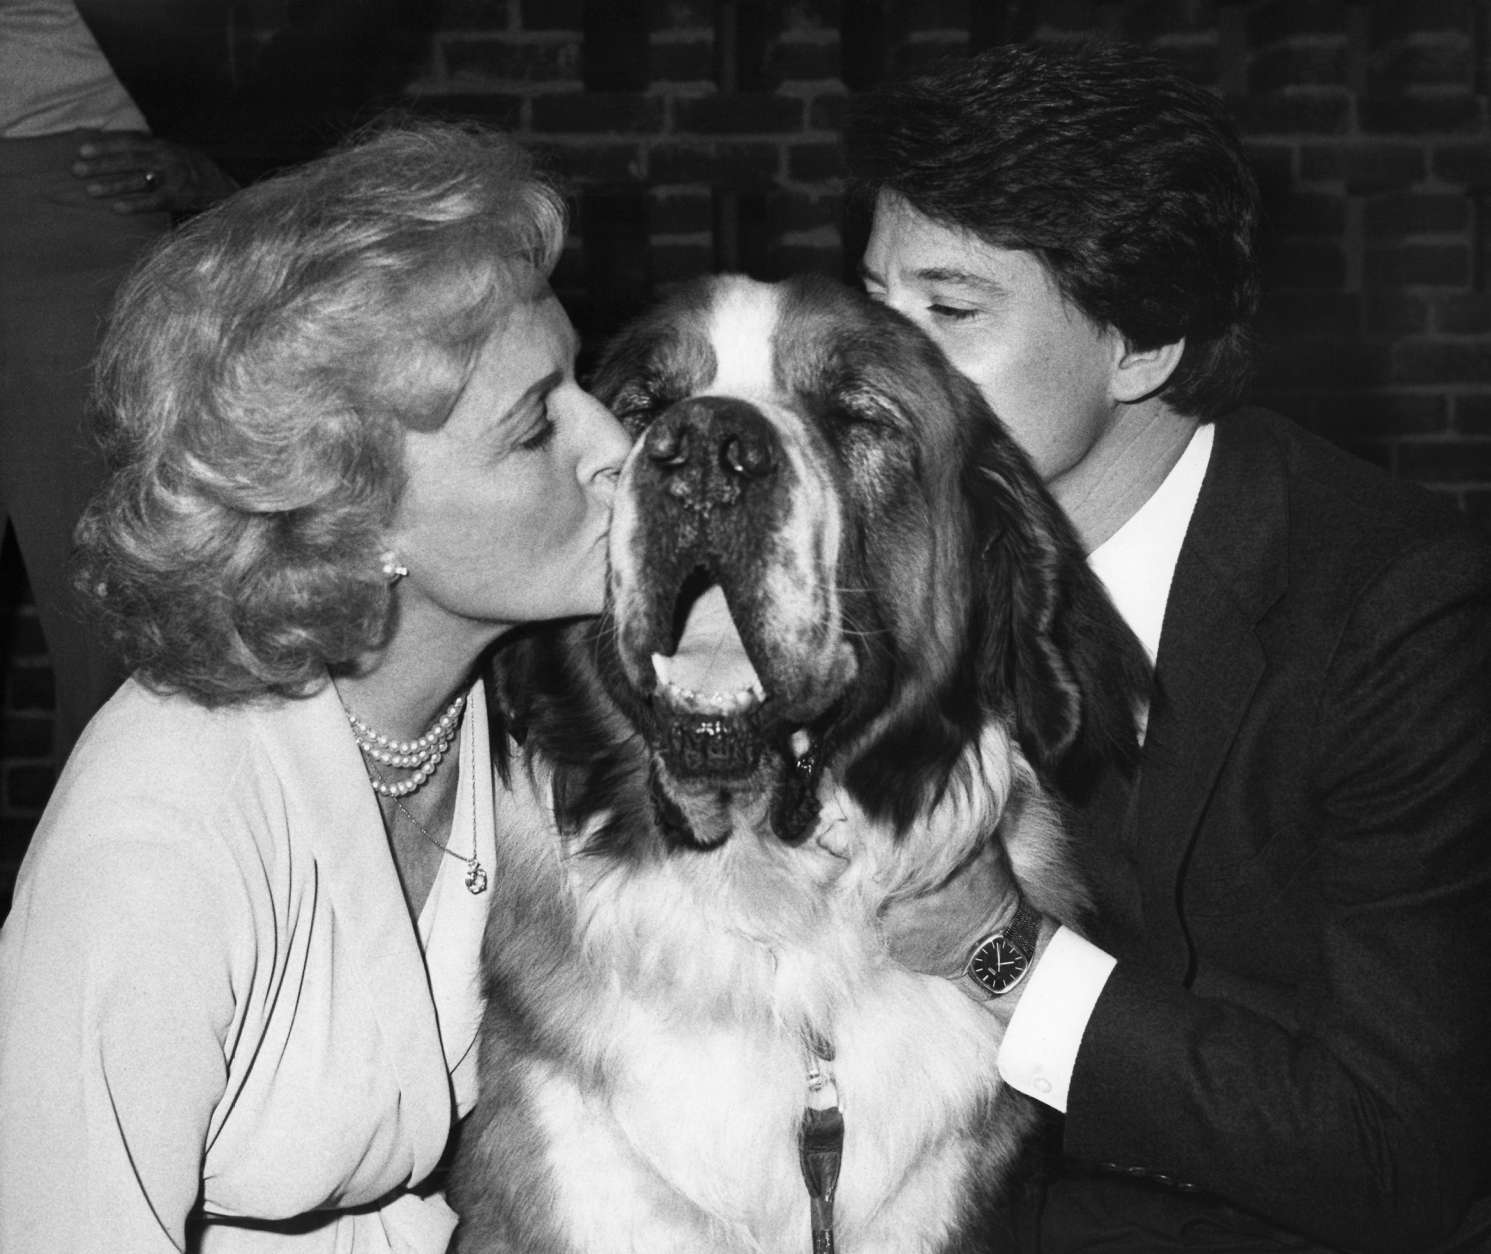 Betty White and Anson Williams don?t seem to faze Buckeye, a St. Bernard, during an awards ceremony during which Williams was honored by the Los Angeles Society for the Prevention of Cruelty to Animals as a friend and lover of animals. Ms. White presented a humanitarian plaque to Williams at the event, which was held in Hollywood, California, Friday, May 1, 1982. (AP Photo/Marc Karody)